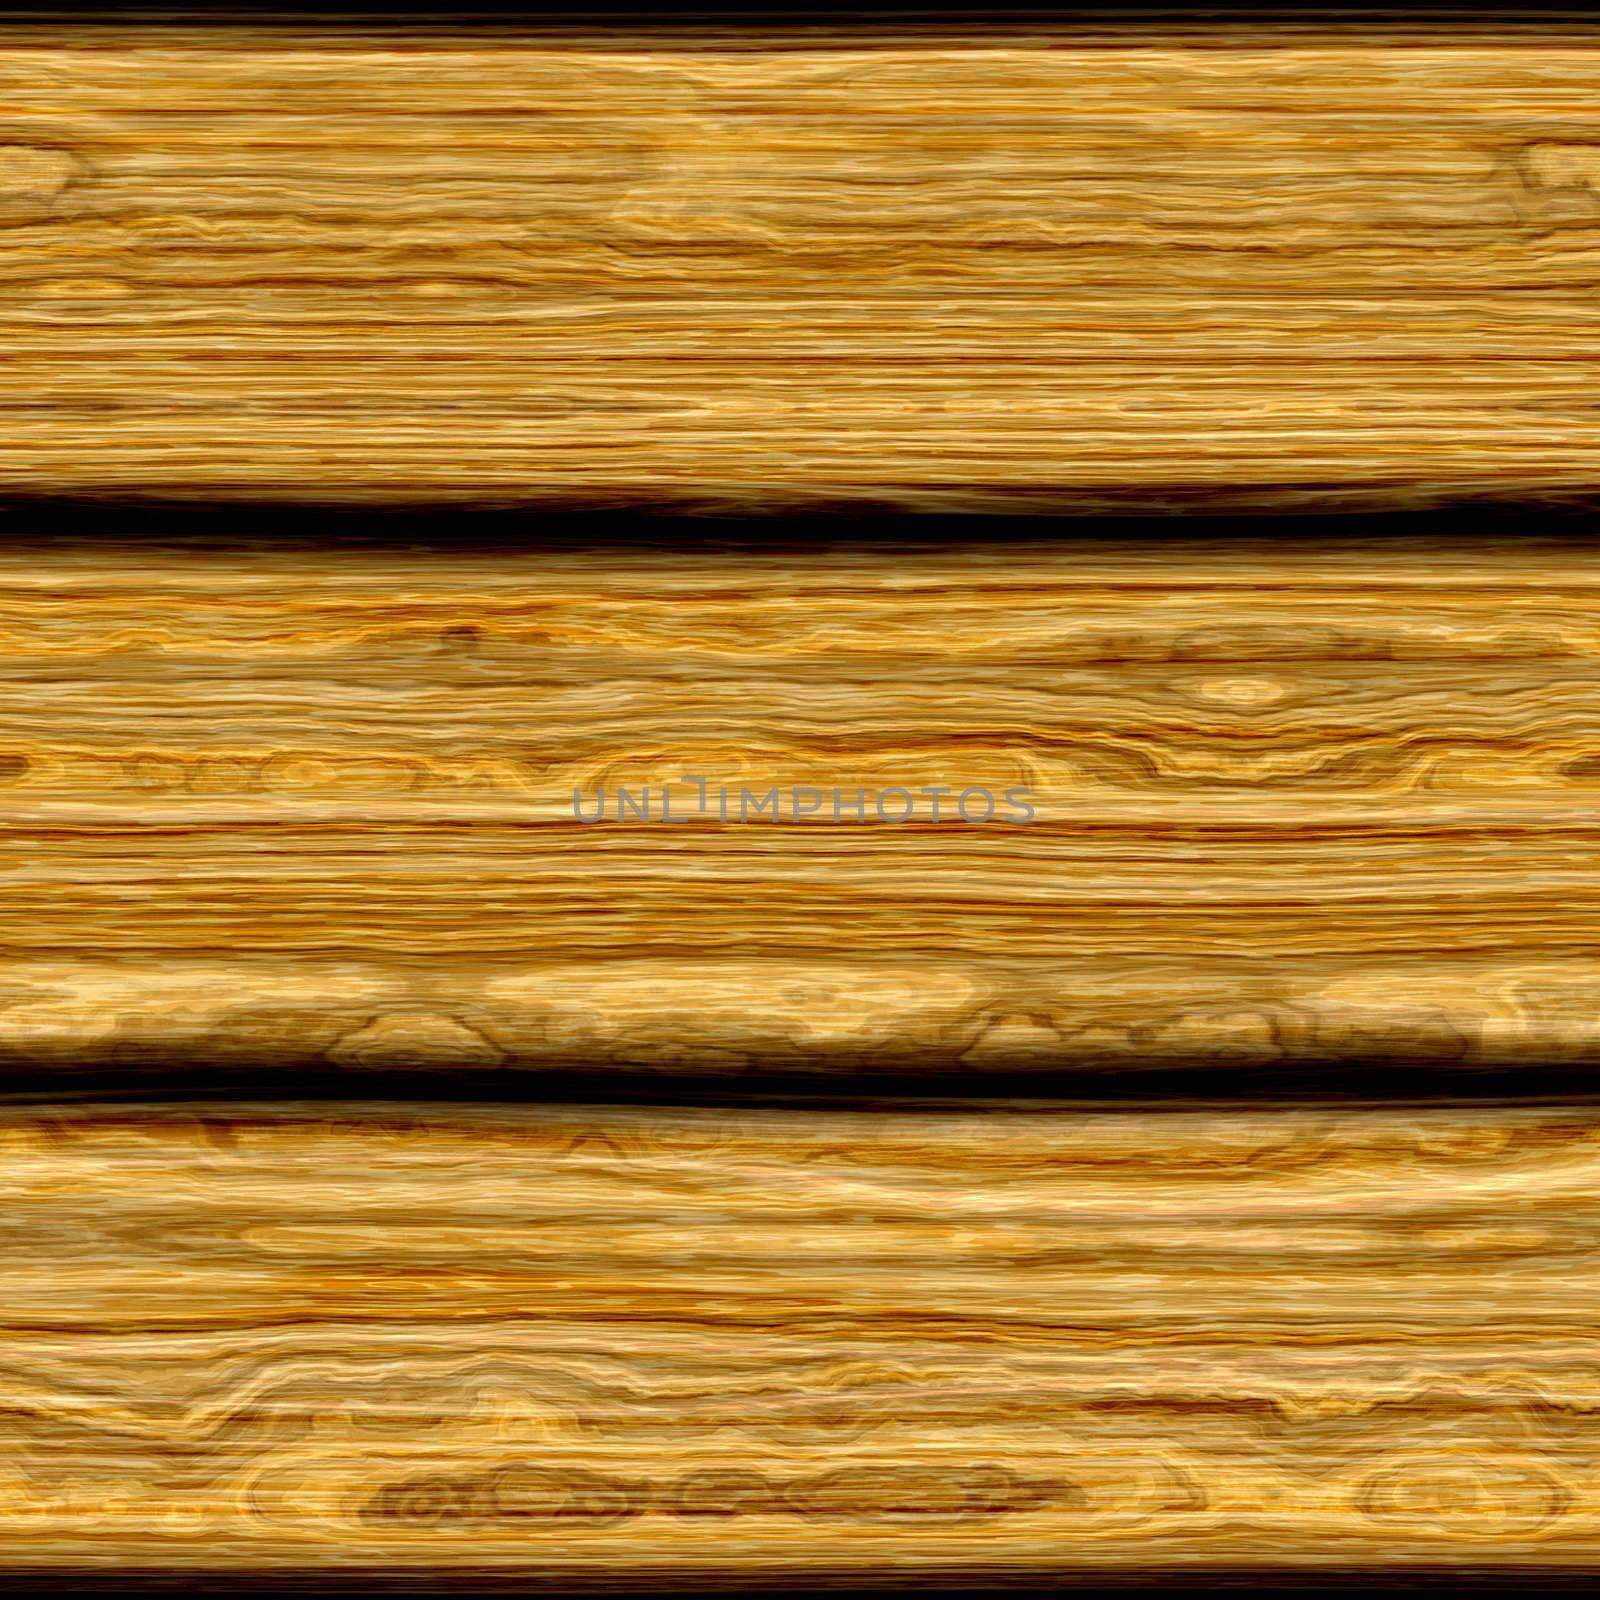 Old weathered wooden boards texture that tiles seamlessly as a pattern.  Works great for floors and walls.